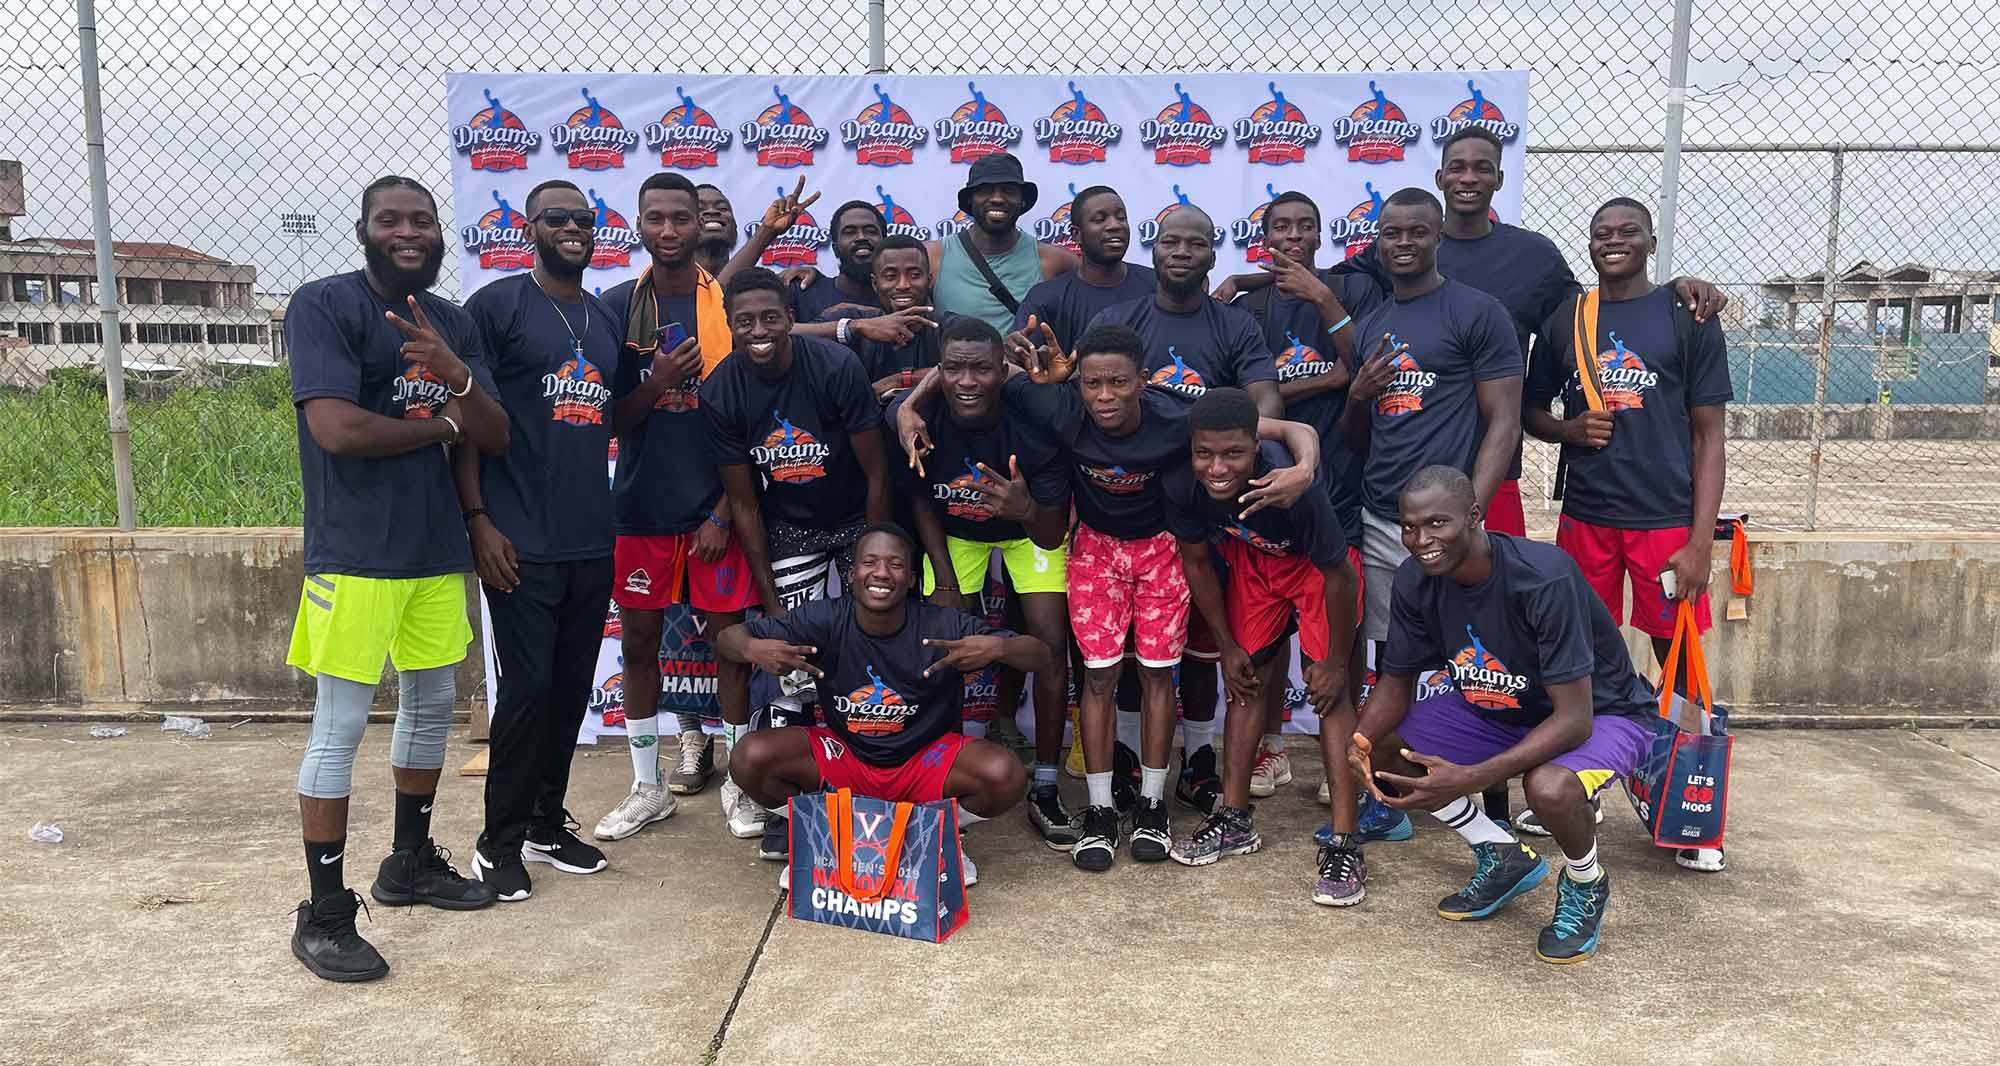 Soroye poses for a group photo with 18 men in team t-shirts